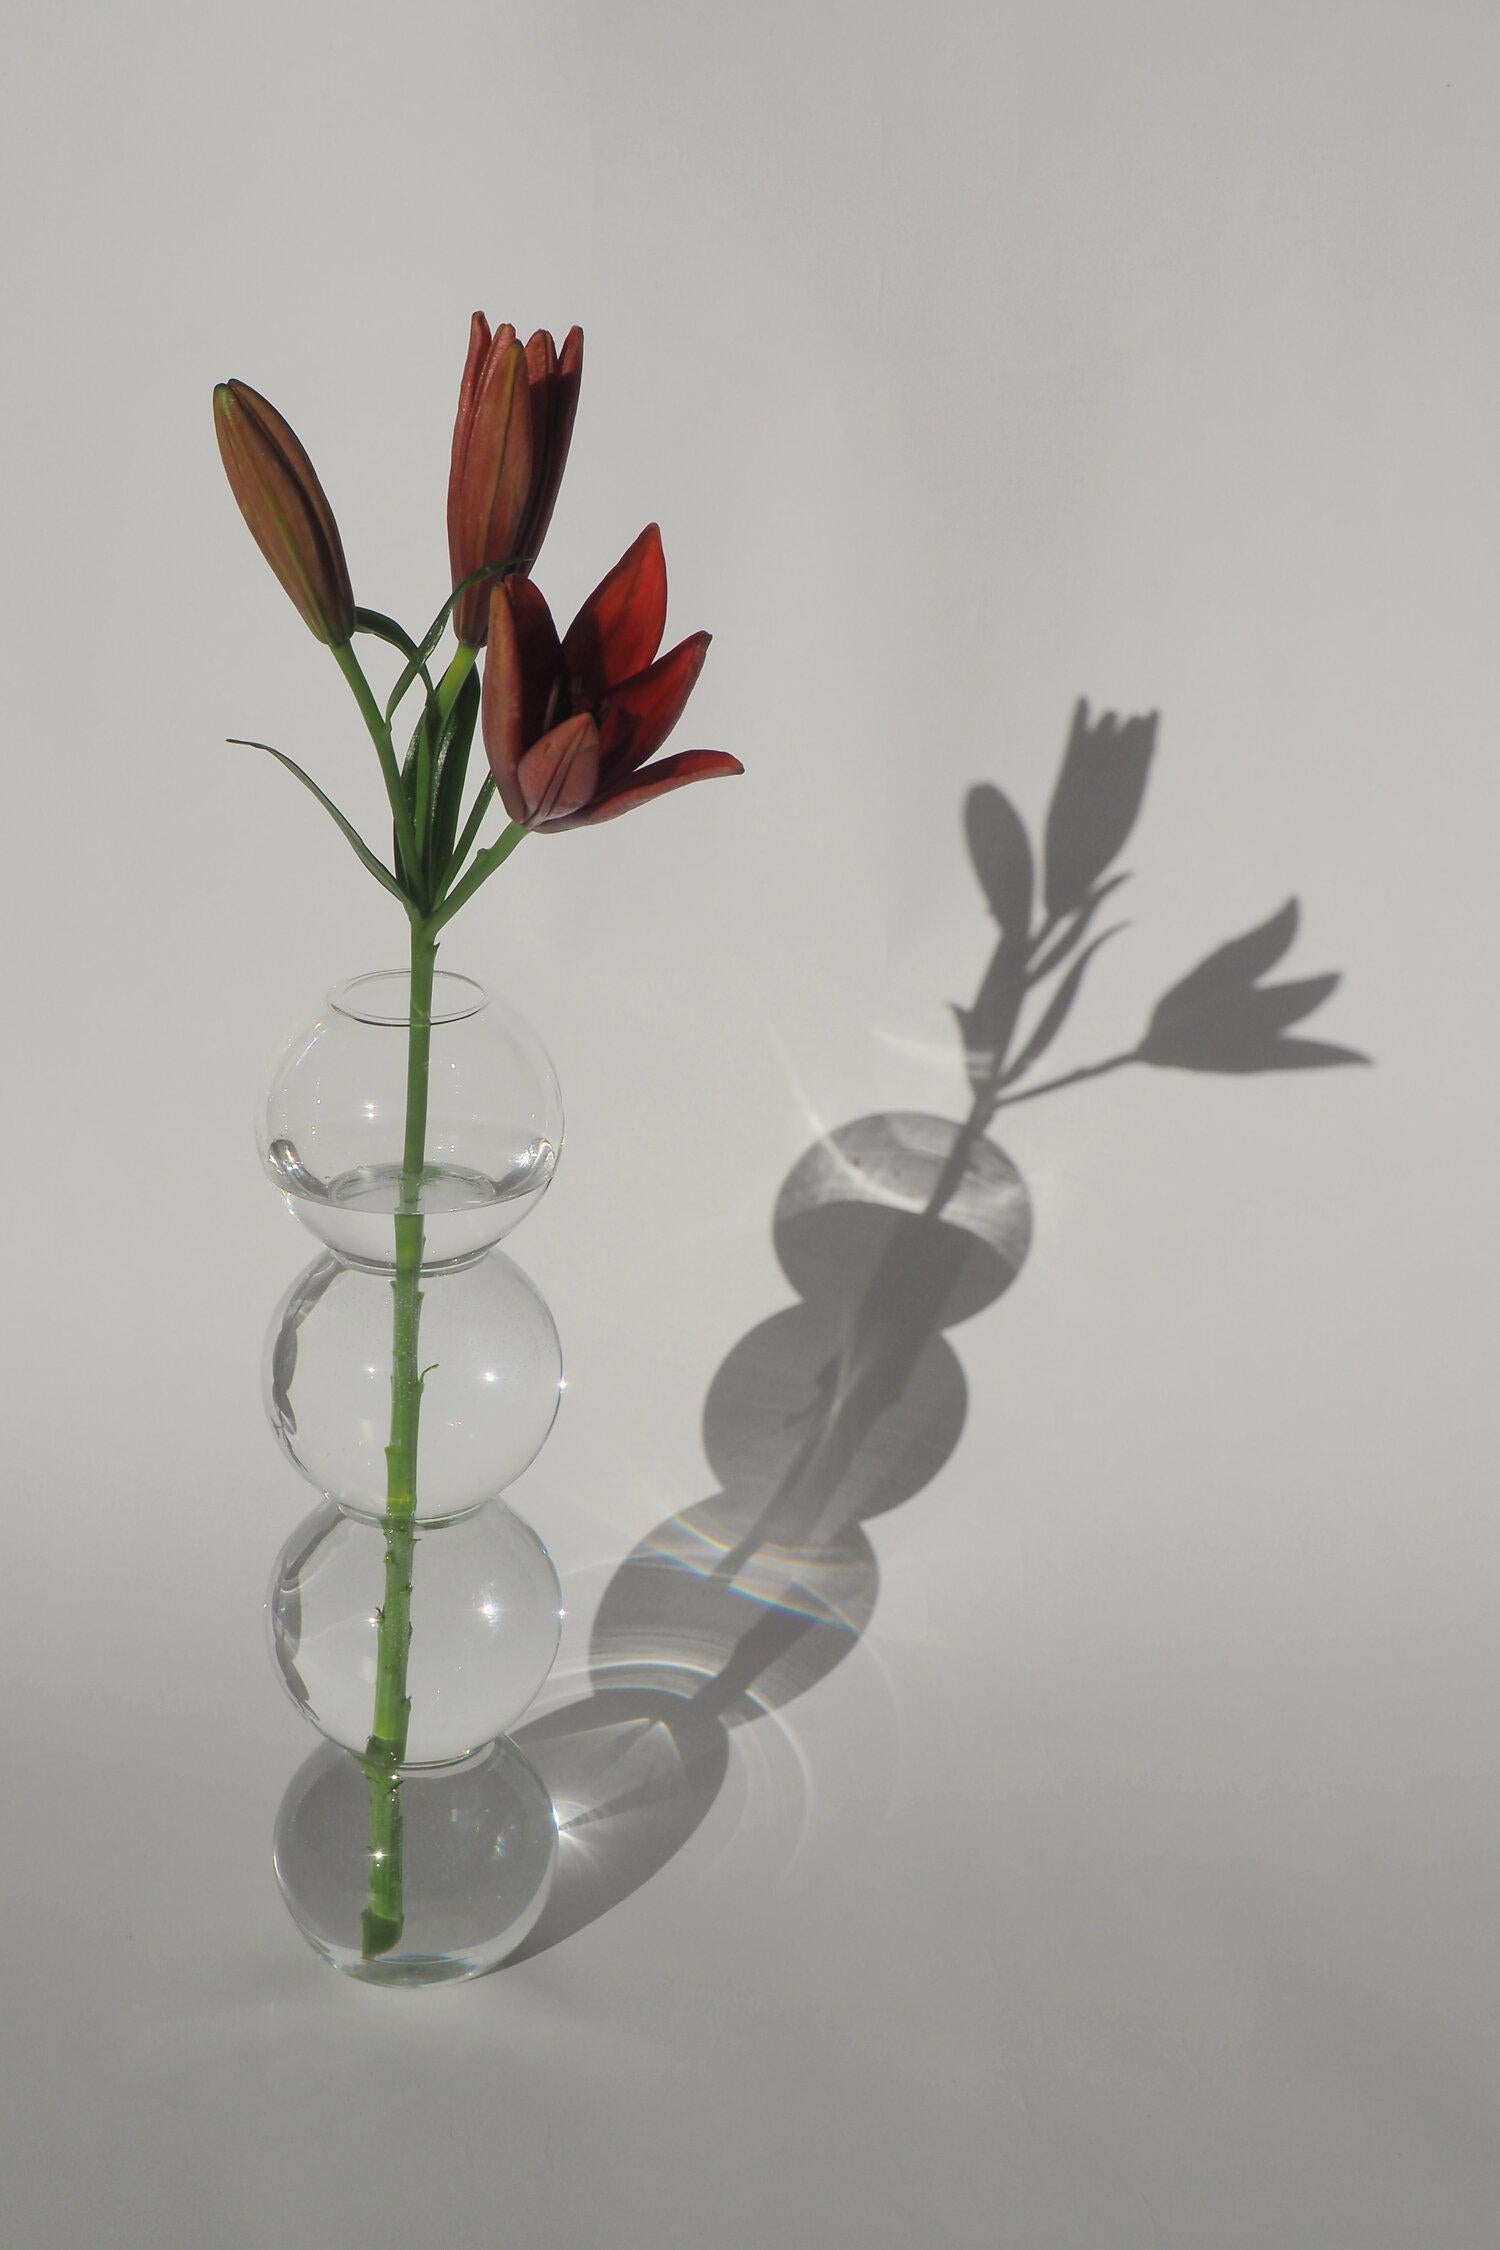 A set of 8 clear bubble vases by Valeria Vasi
Handmade in Barcelona, 2021
Materials: glass
Dimensions: 38 x 10 cm
Also available in: teal, pink, blue. 

A sculptural vase entirely crafted in Barcelona by a skillful local artisan using a glass